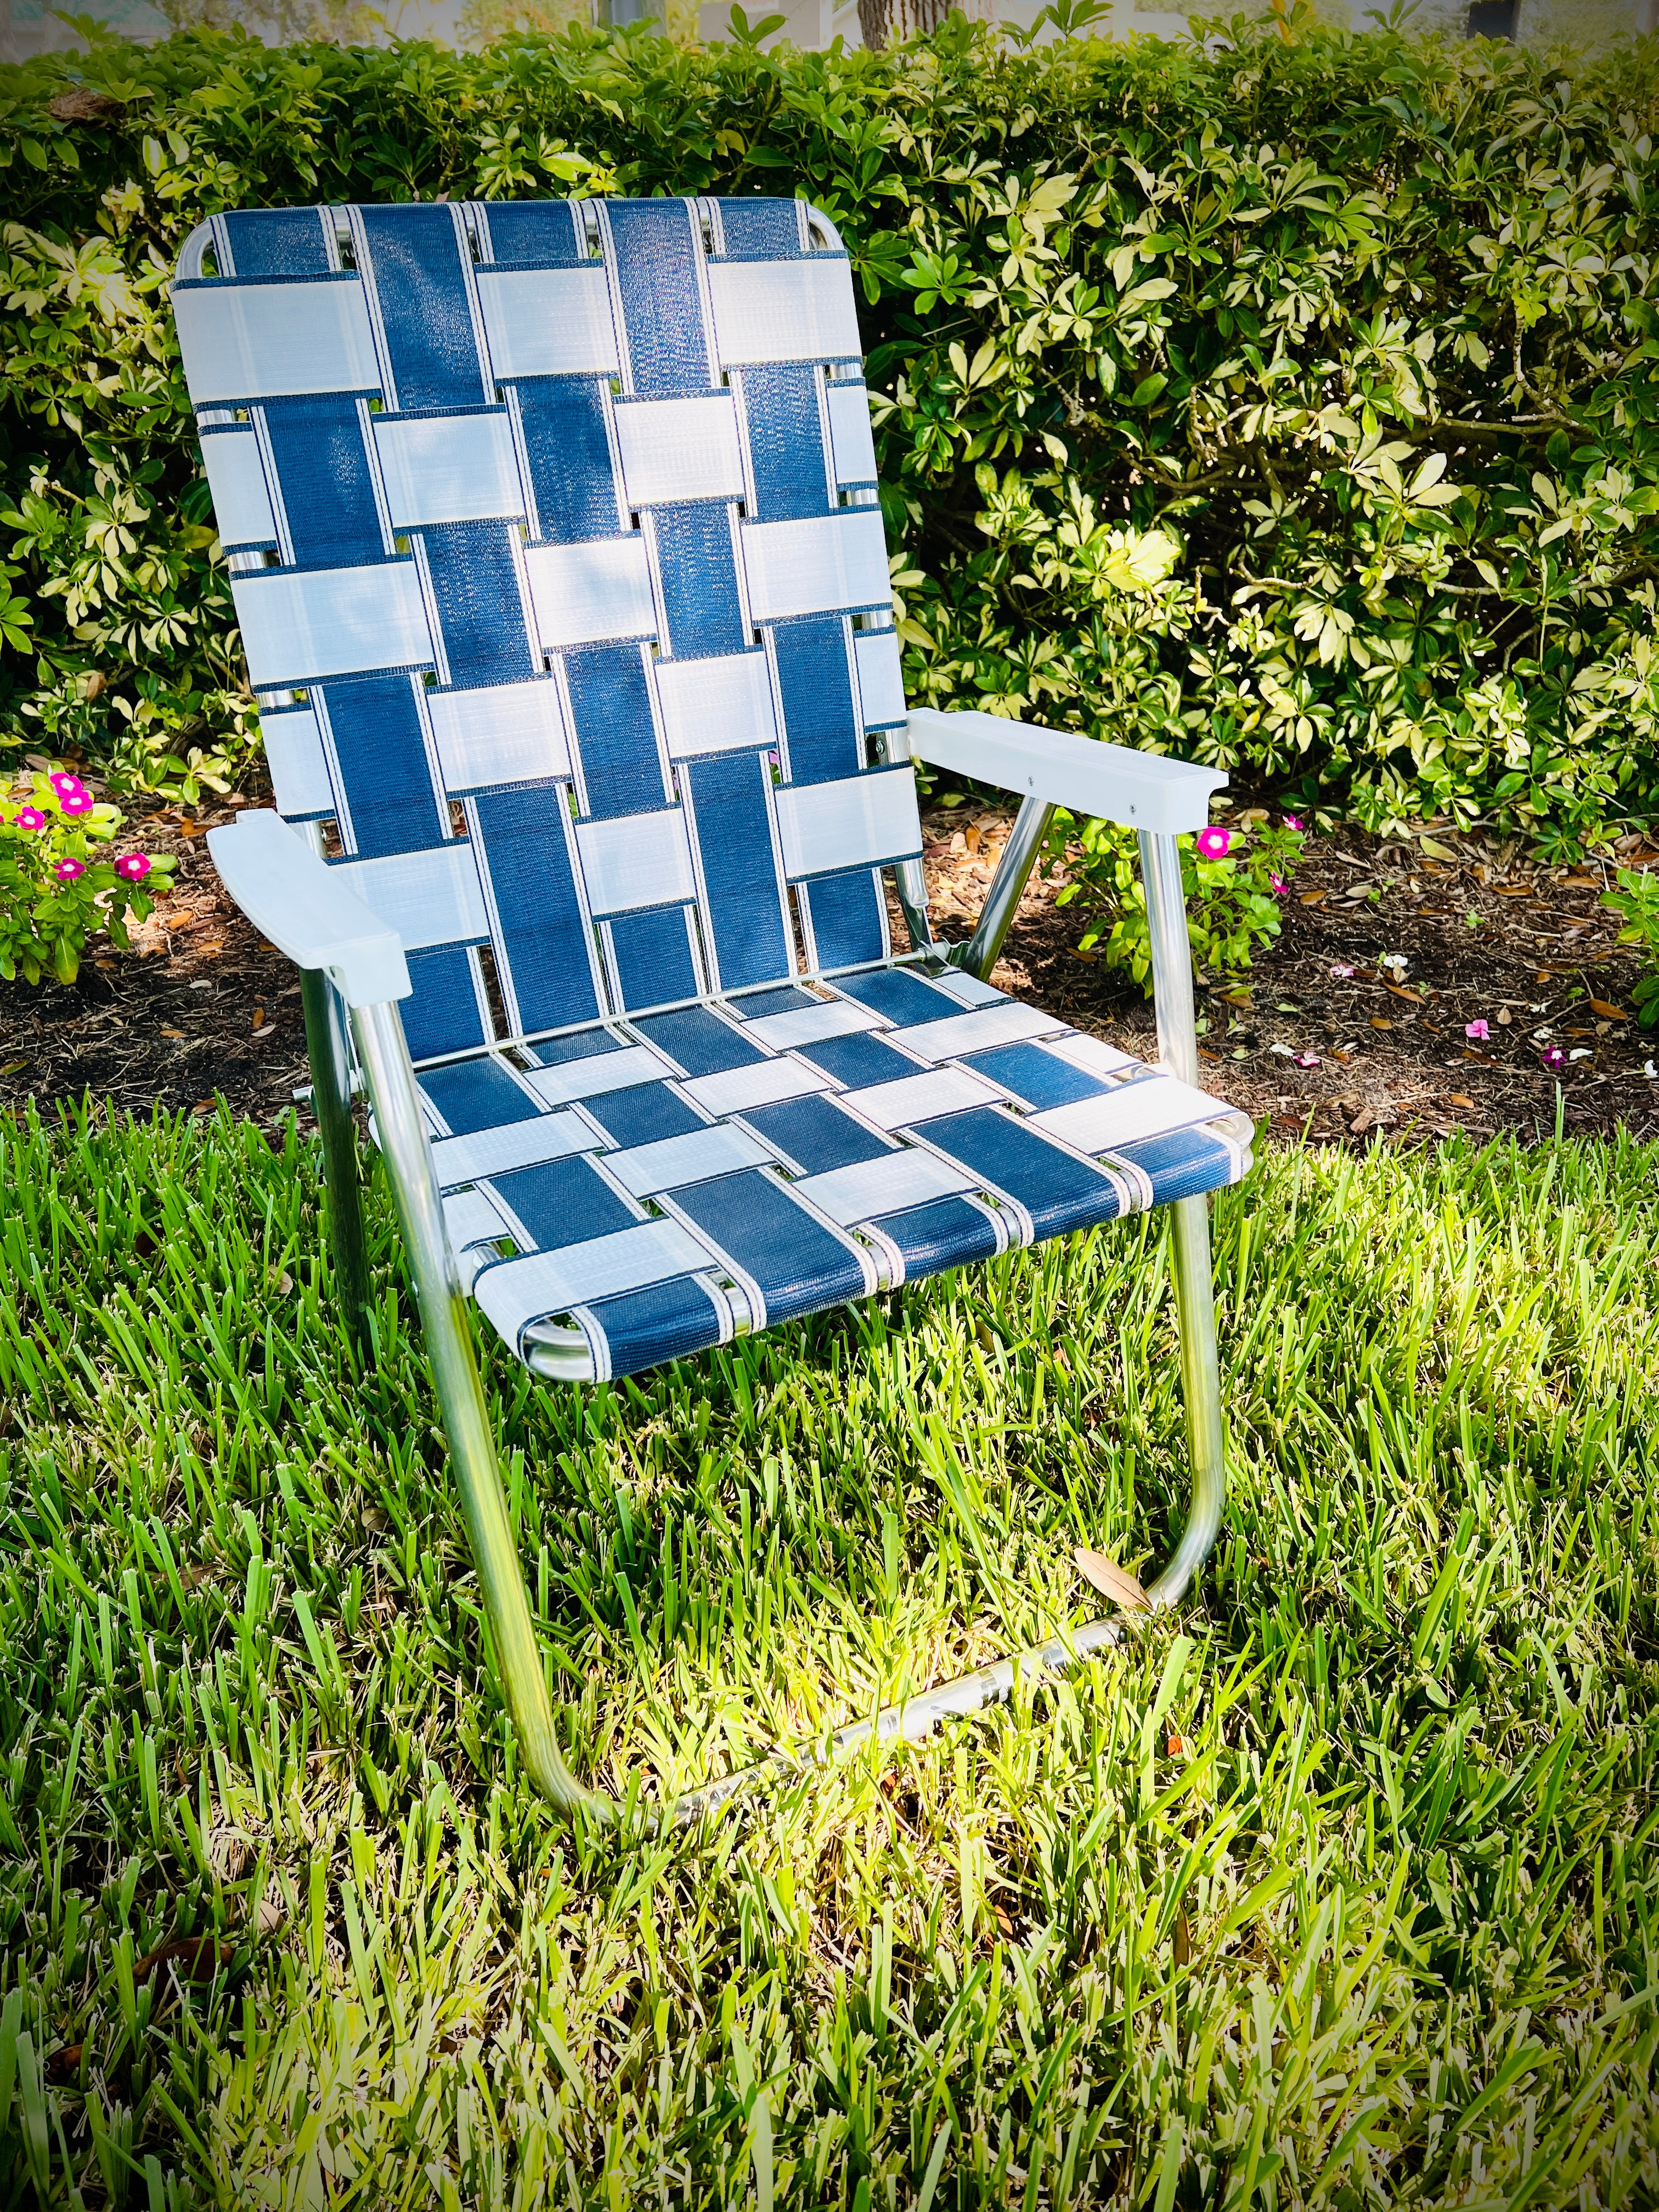 St. Augustine Classic Chair Lawn Chair USA Aluminum Webbing Chair Sitting Outside in Grass flowers